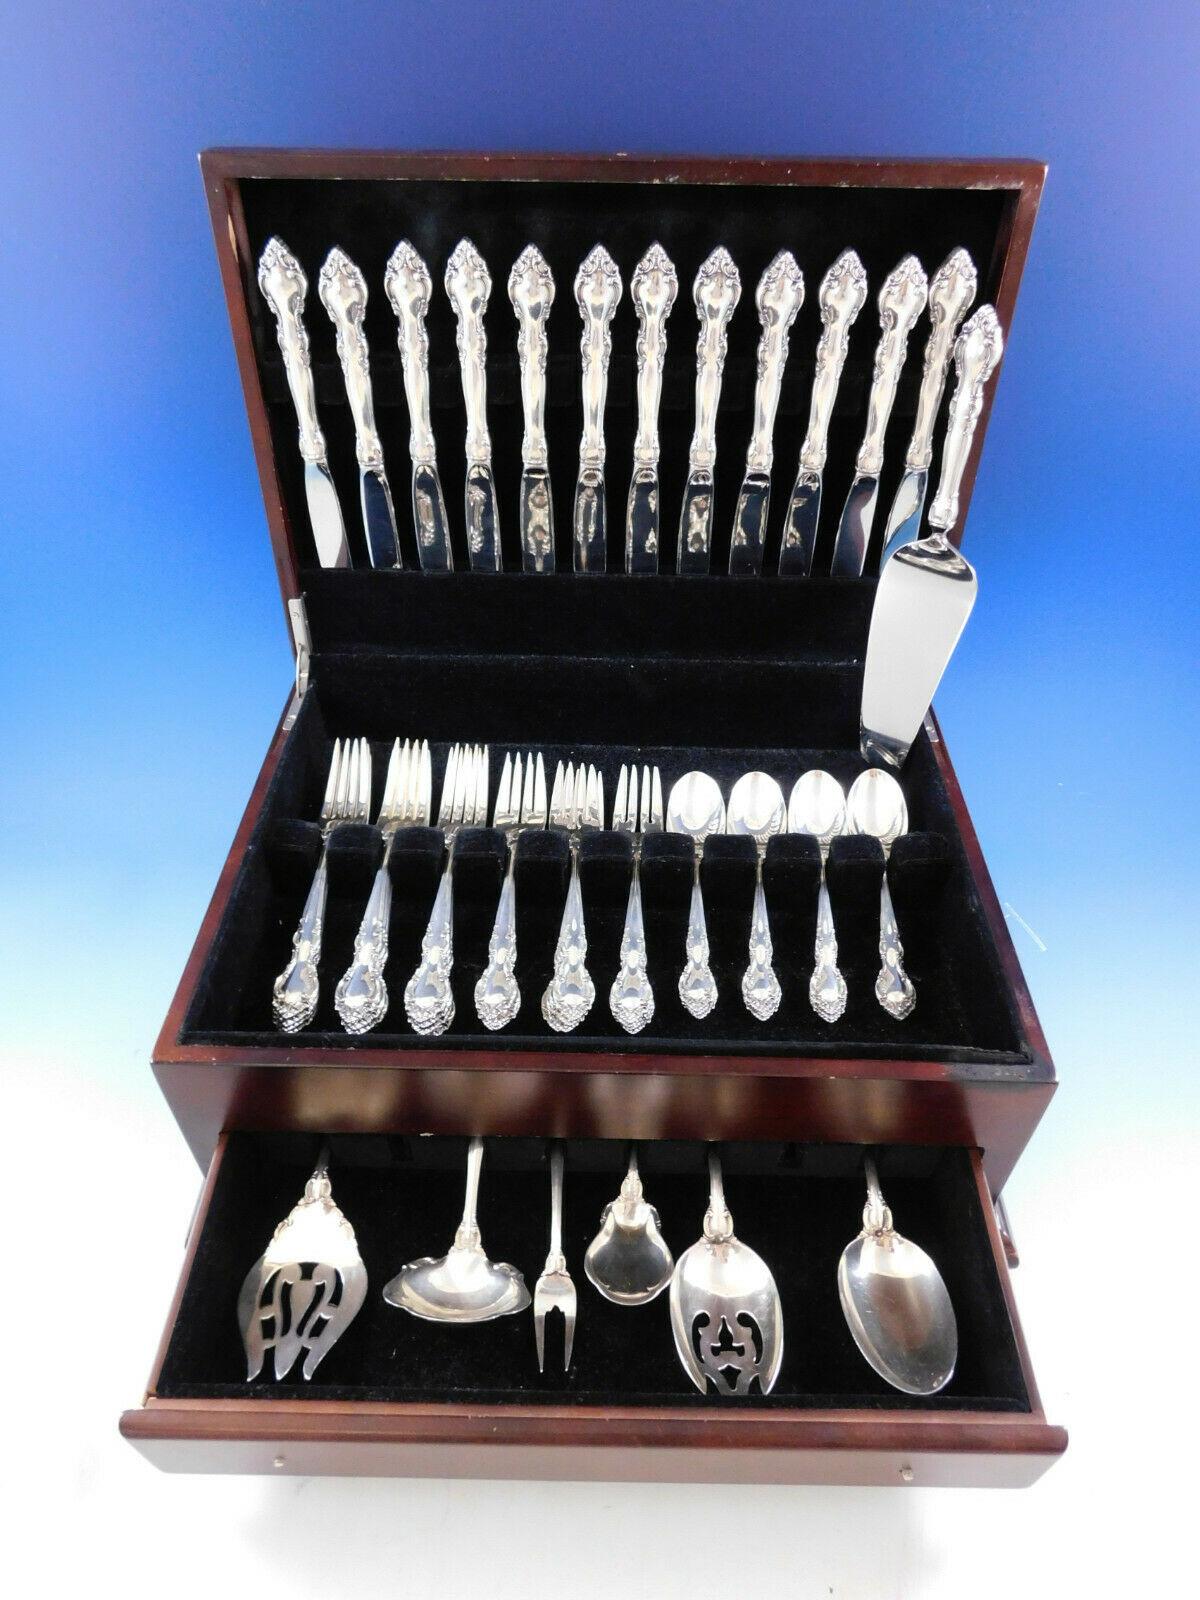 Malvern by Lunt sterling silver flatware set - 55 pieces. This set includes:

12 Knives, 9